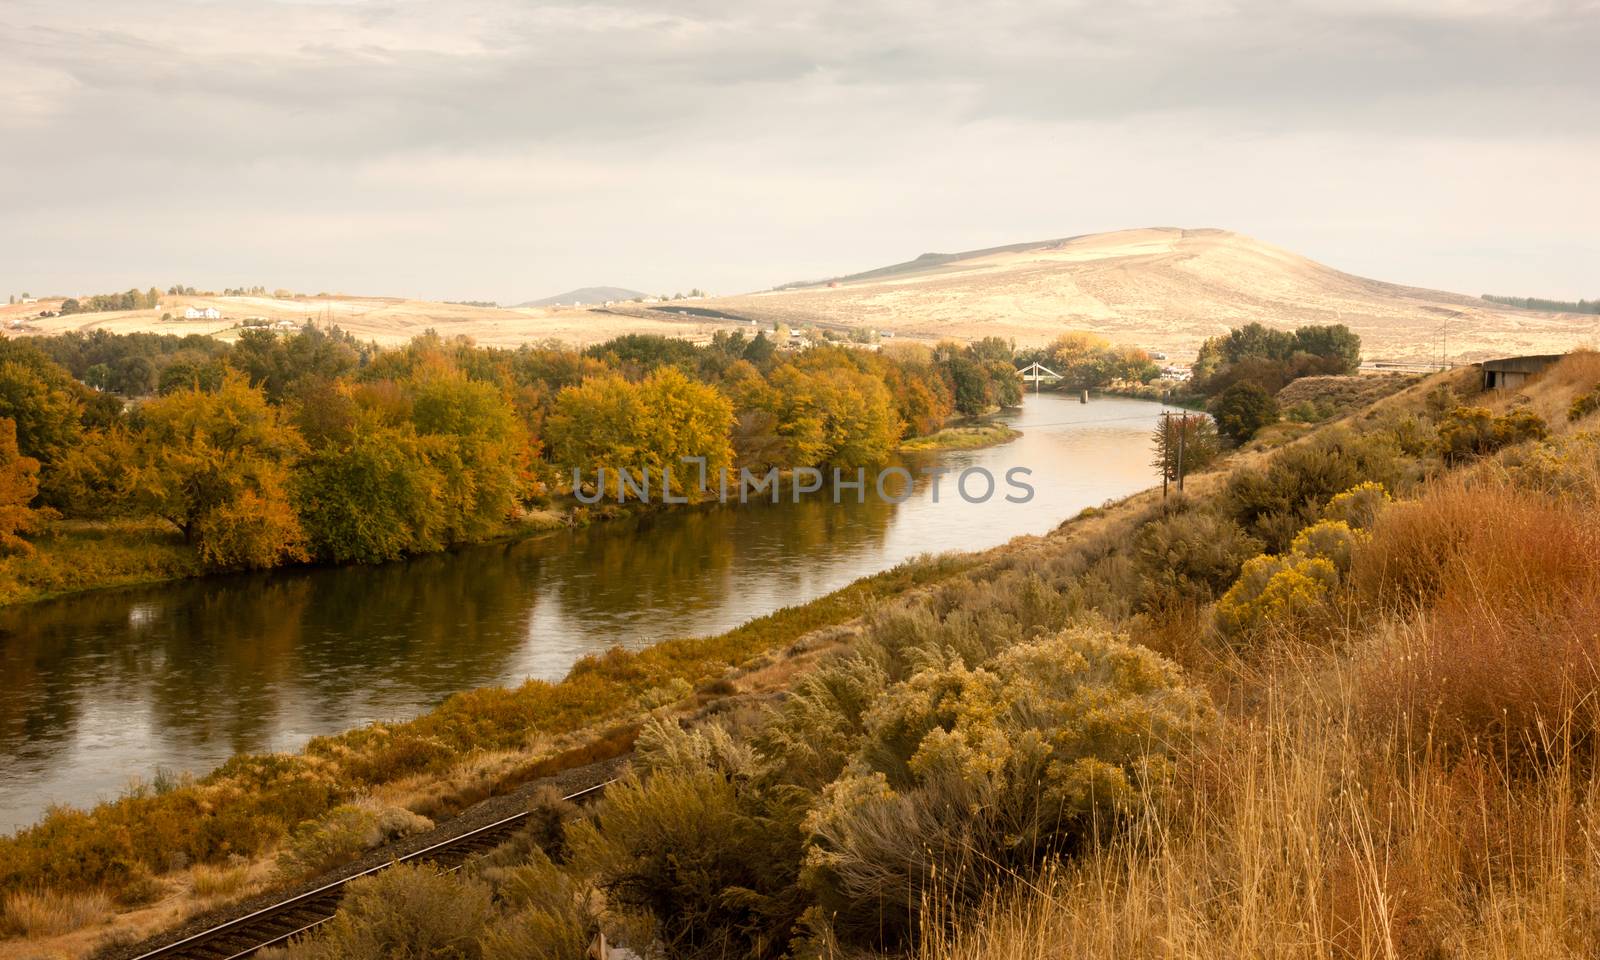 Storm Clearing Over Agricultural Land Yakima River Central Washington by ChrisBoswell